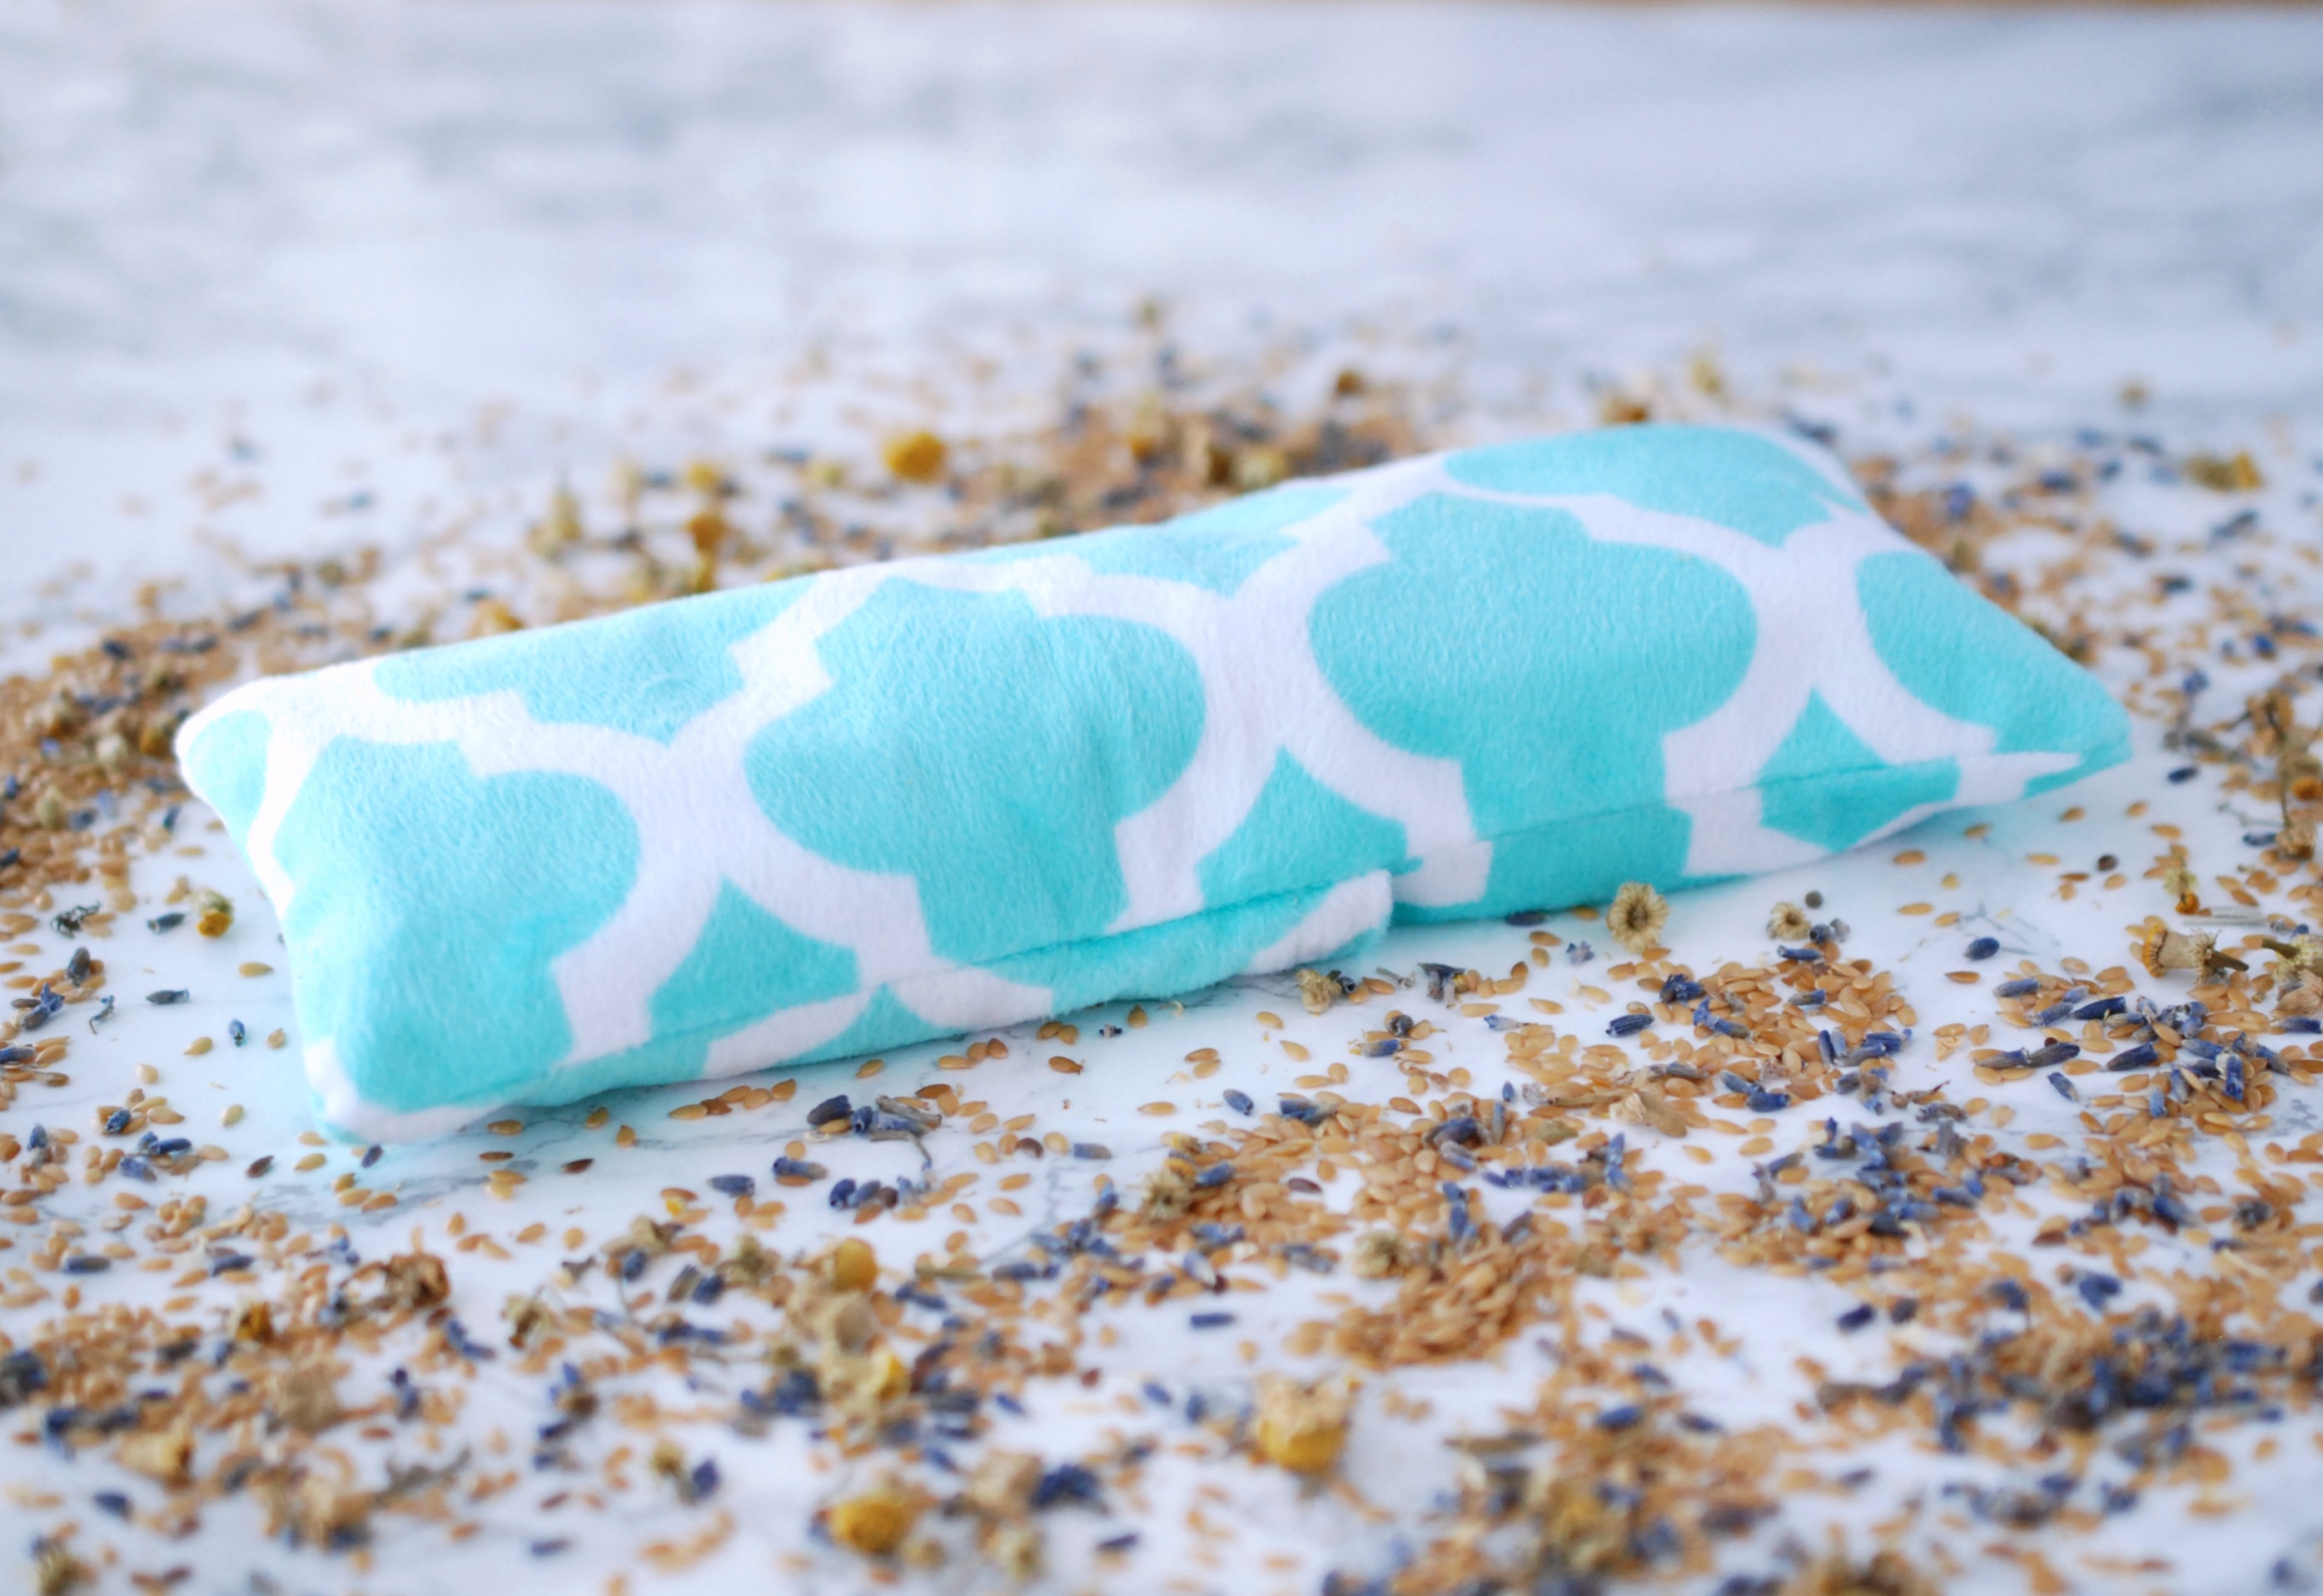 Learn how to make a flaxseed, lavender and chamomile eye pillow to help combat nasty headaches. #MoreMomentsWithExcedrin #ad